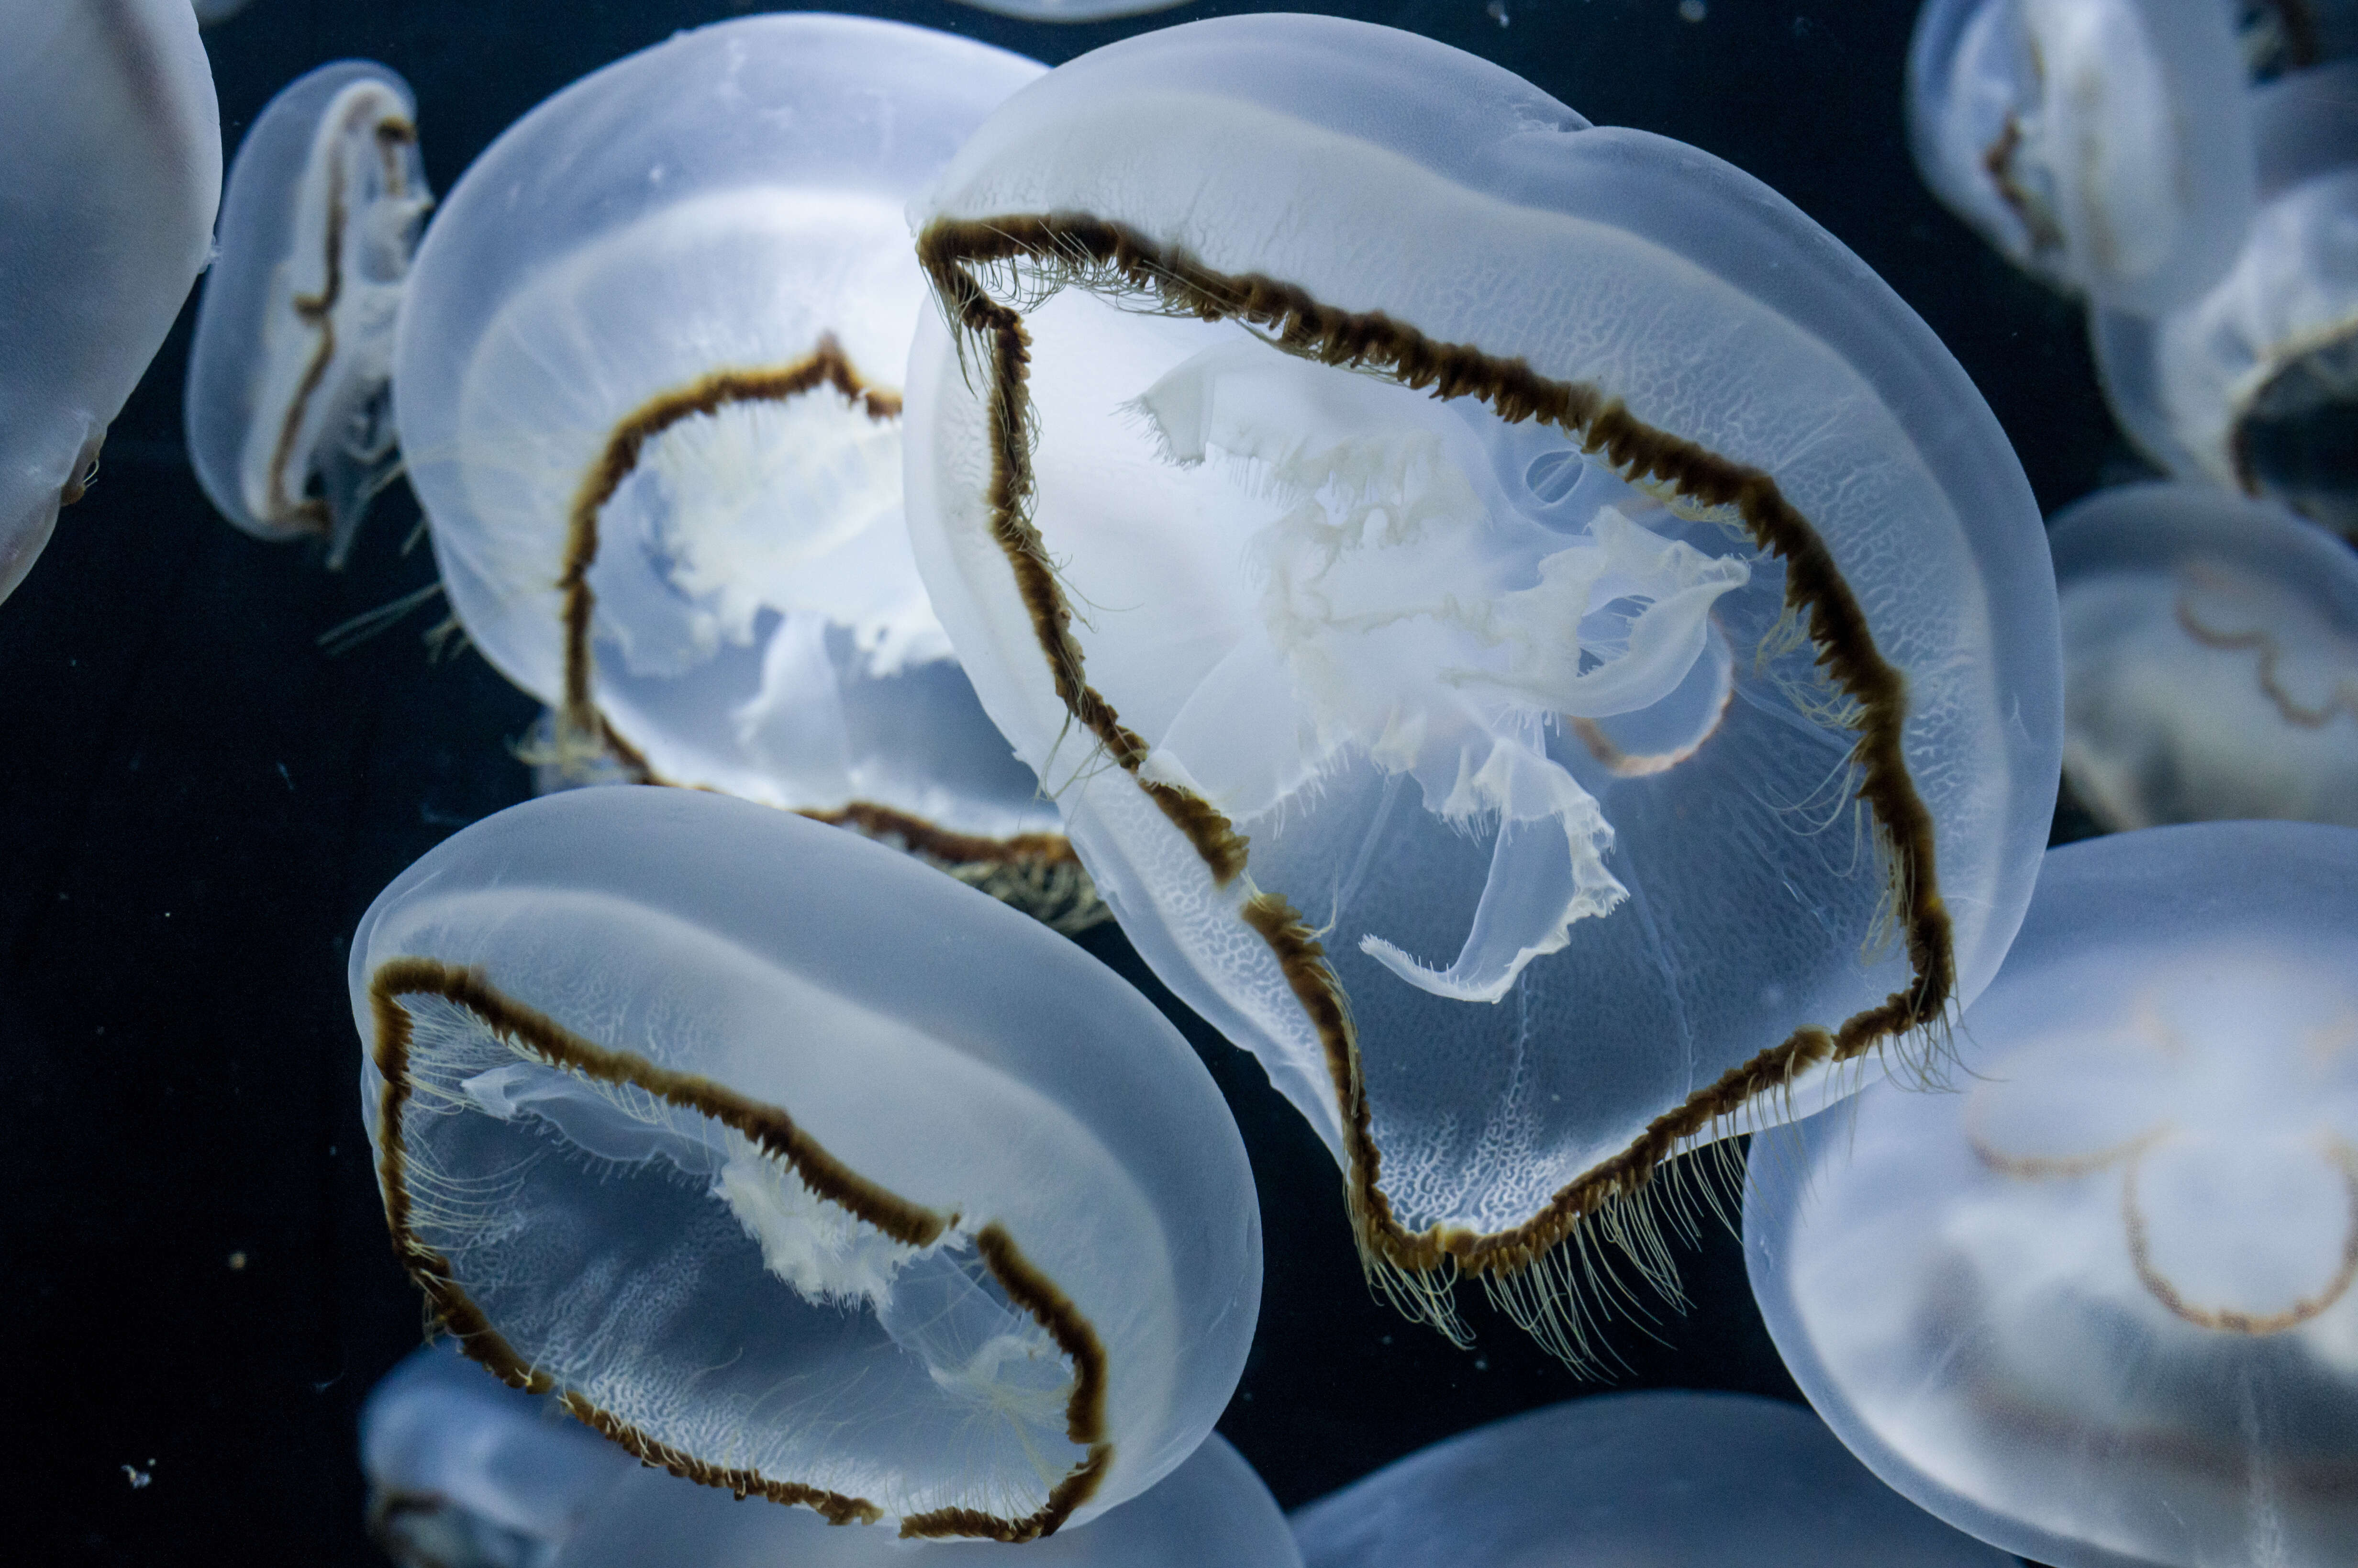 Image of Brown-banded moon jelly